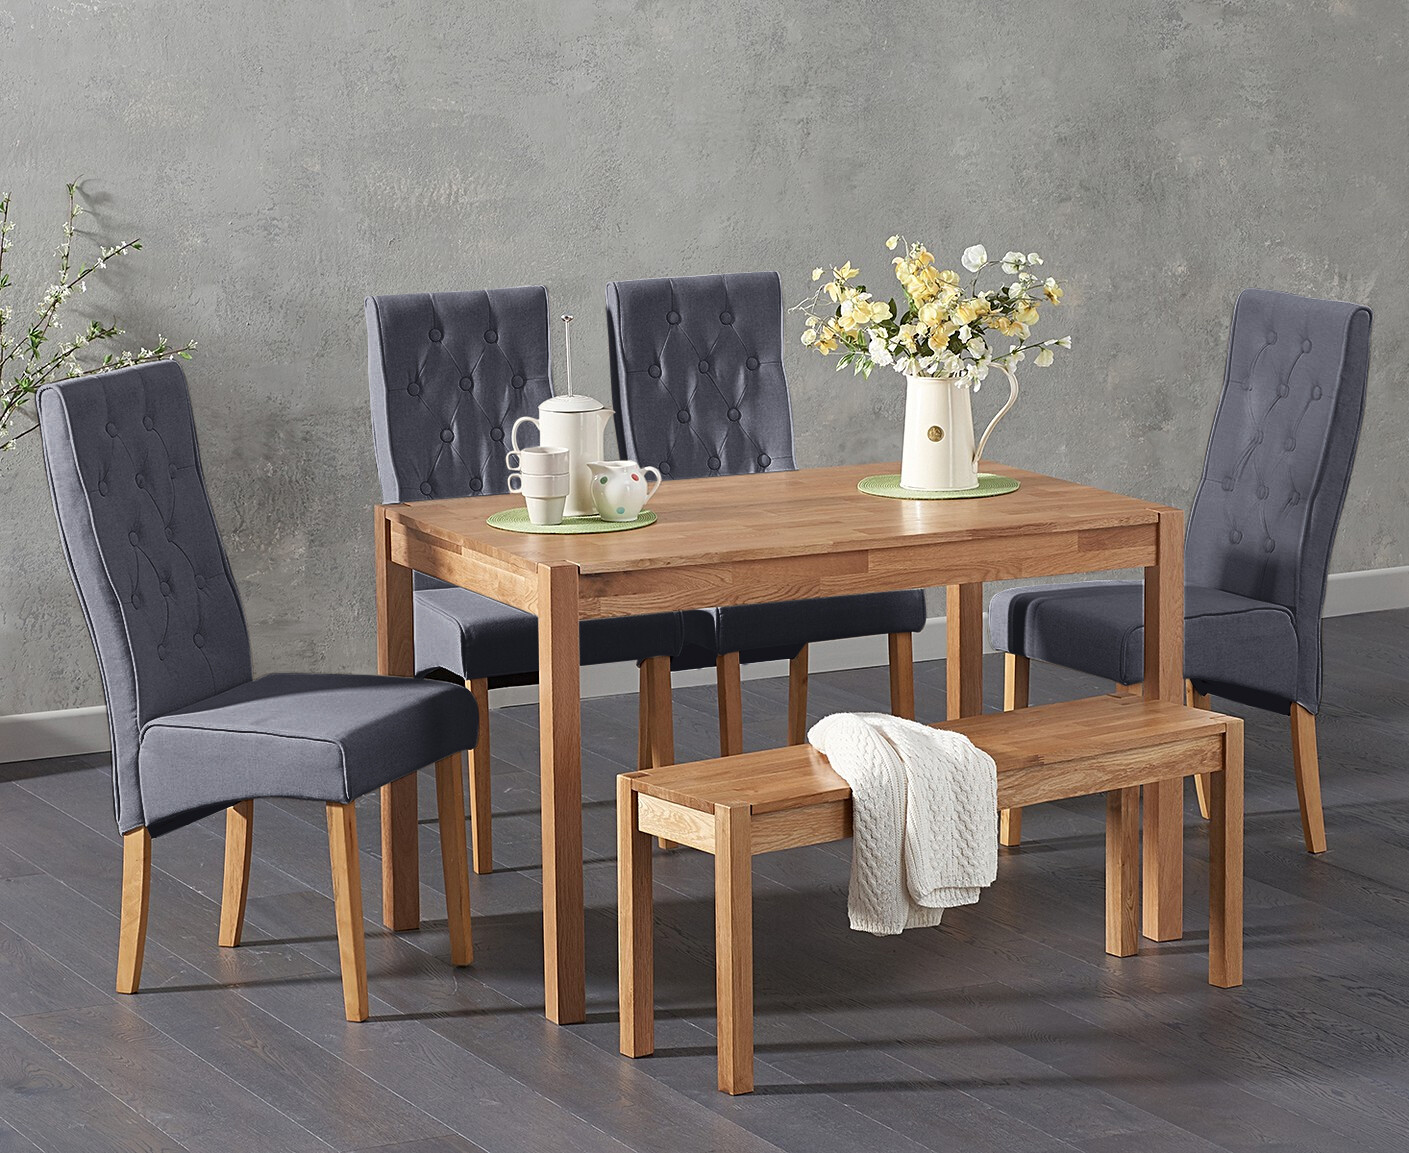 York 120cm Solid Oak Dining Table With 2 Grey Maya Chairs With 1 Oak Bench